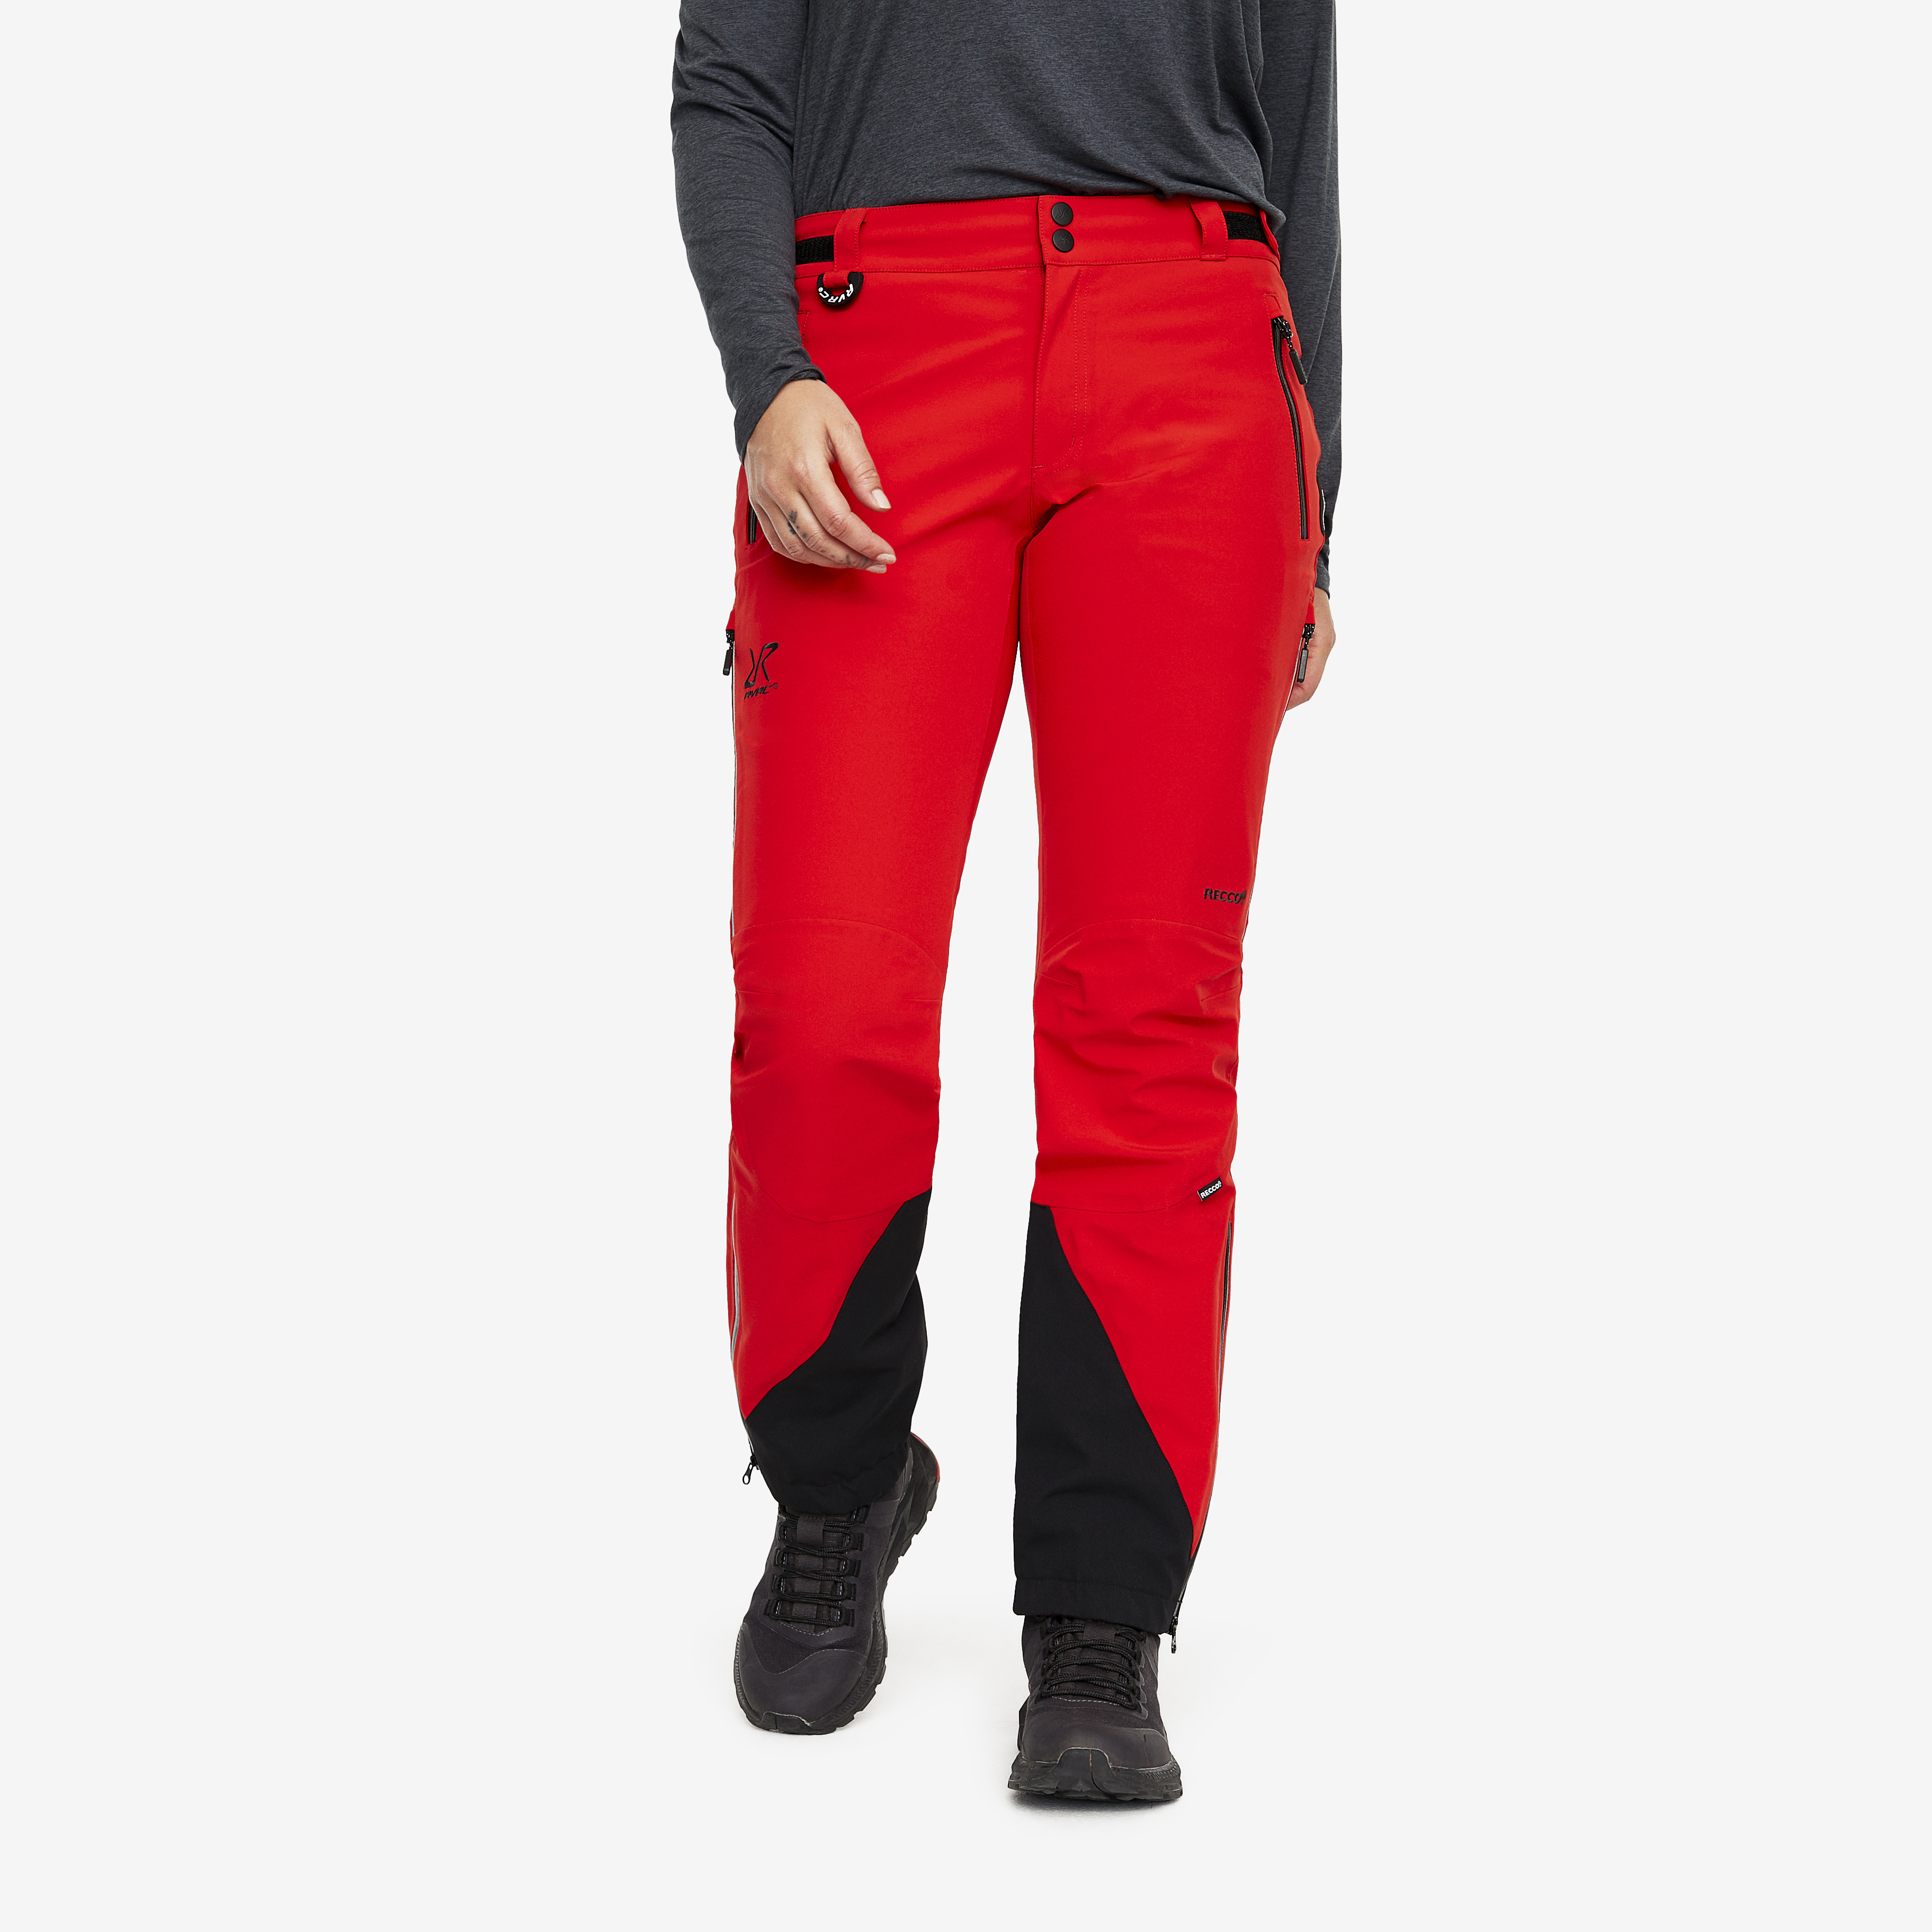 Cyclone Rescue Pants Flame Scarlet Naistele